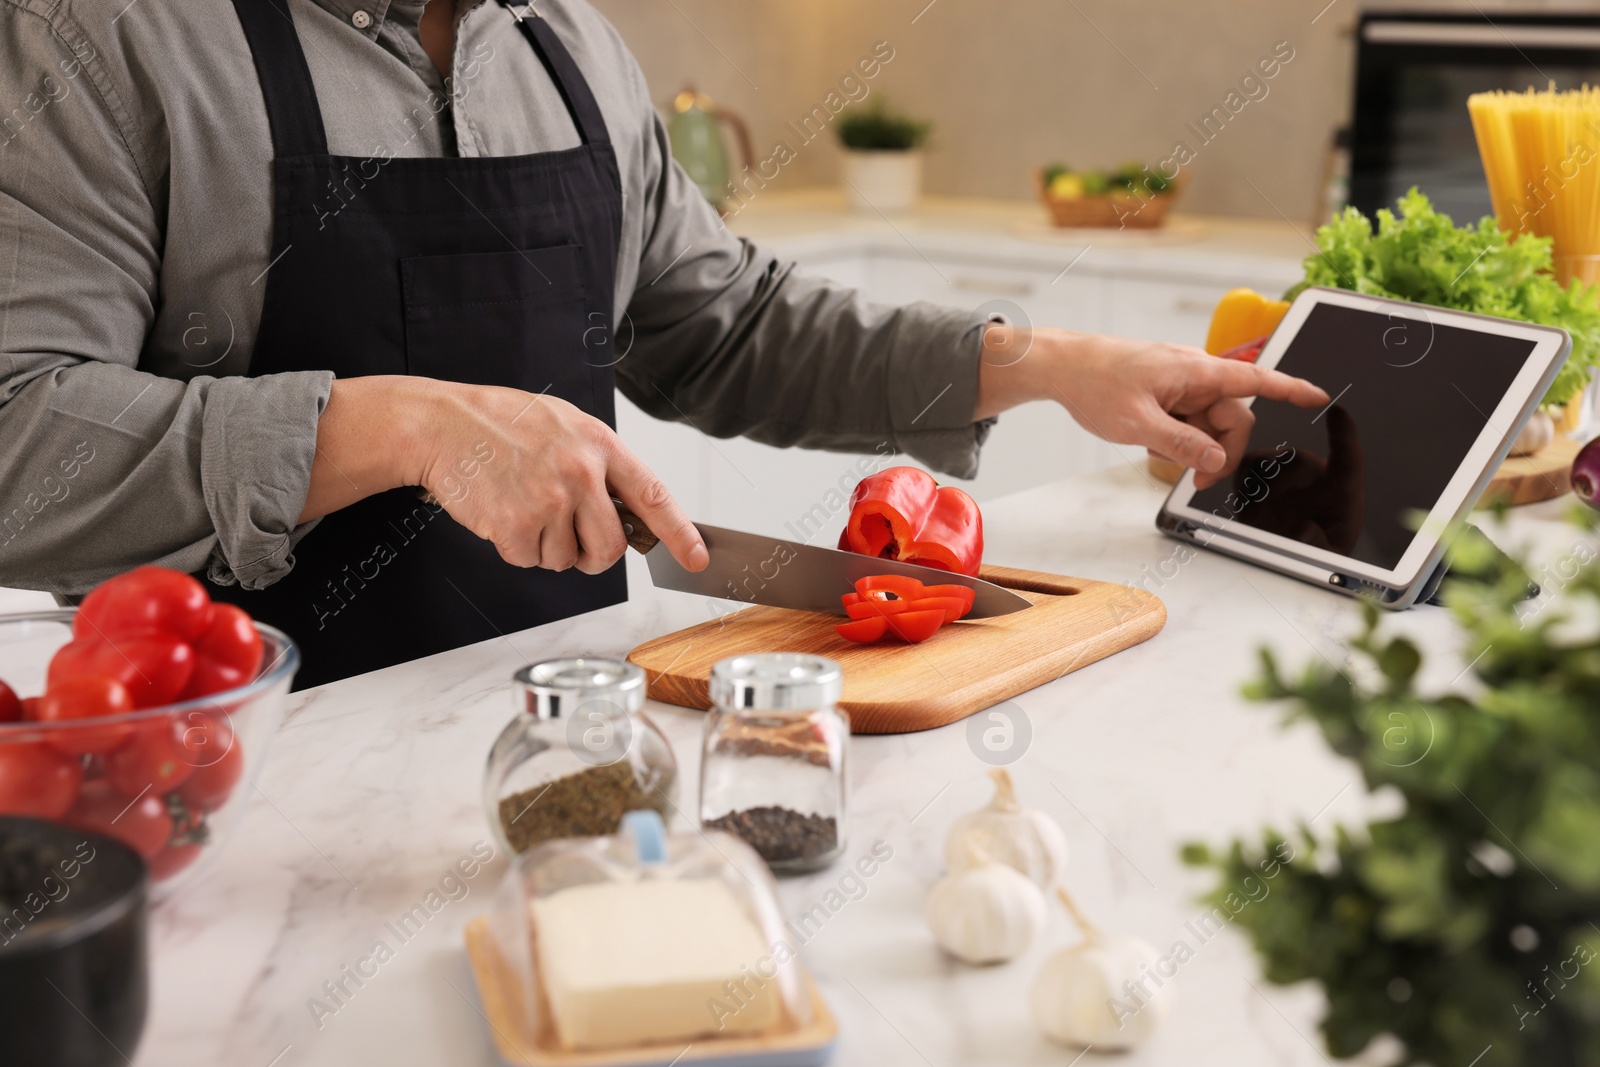 Photo of Cooking process. Man using tablet while cutting fresh bell pepper at white marble countertop in kitchen, closeup